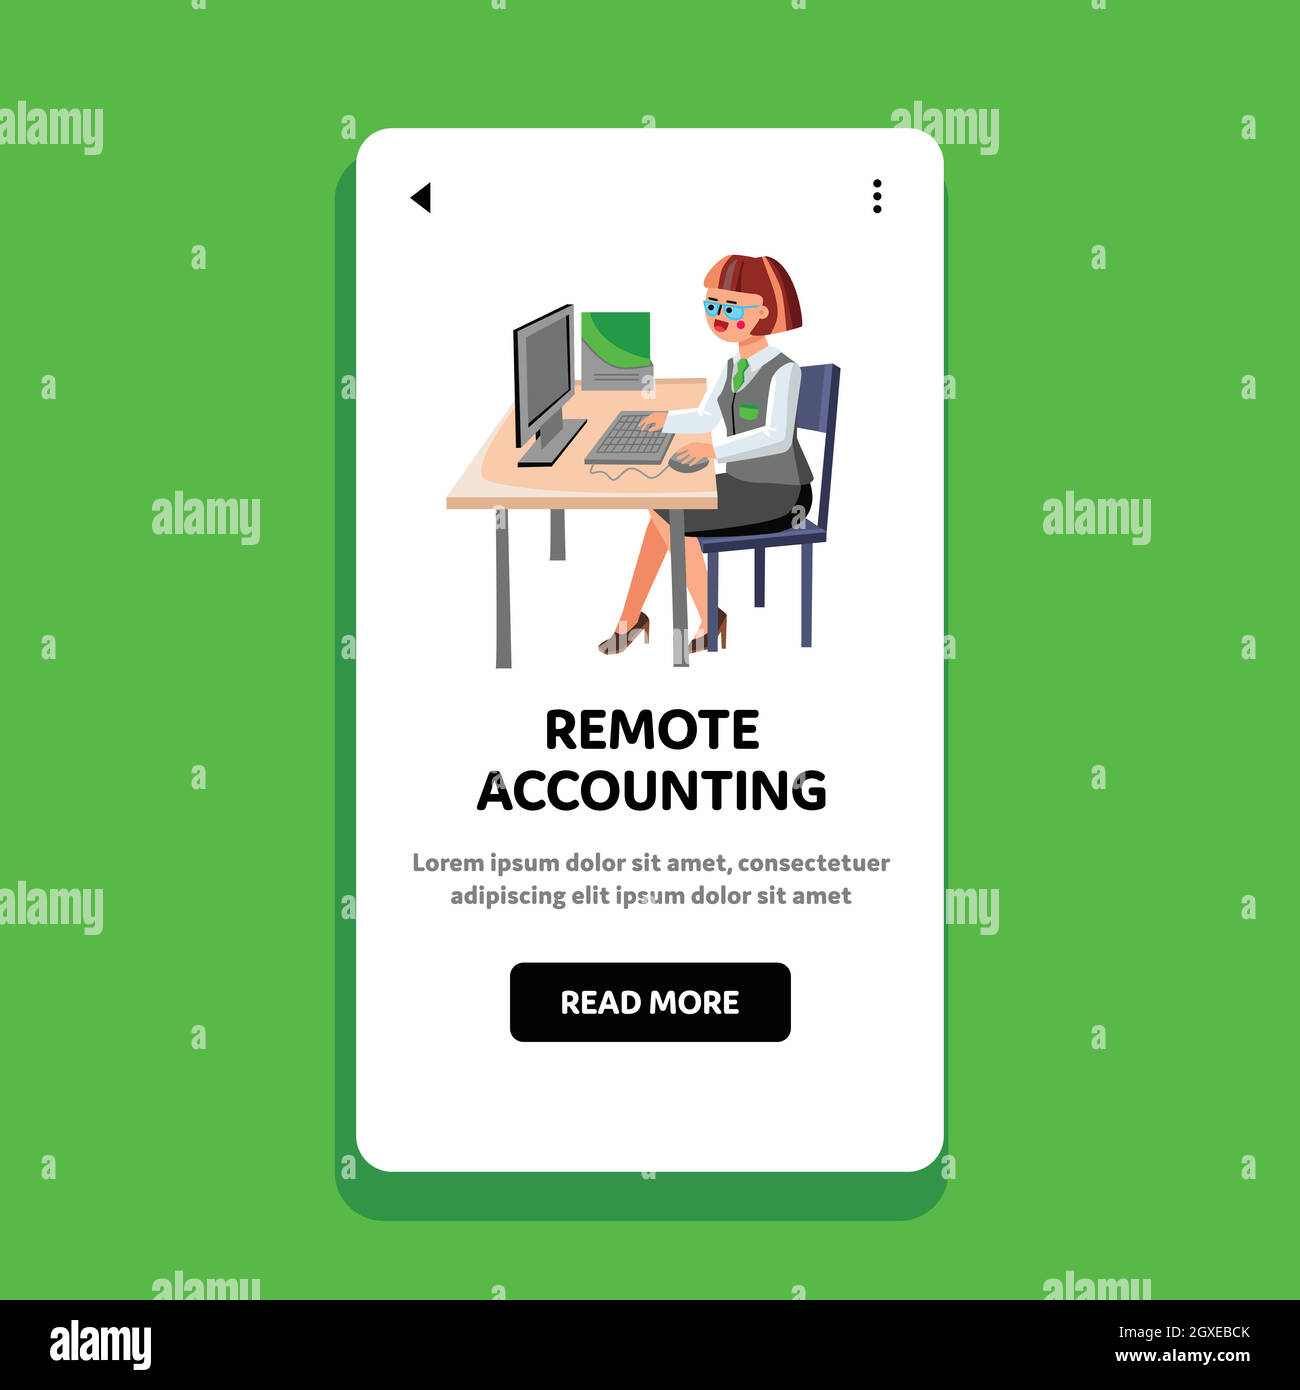 Remote Accounting Doing Office Worker Girl Vector Stock Vector